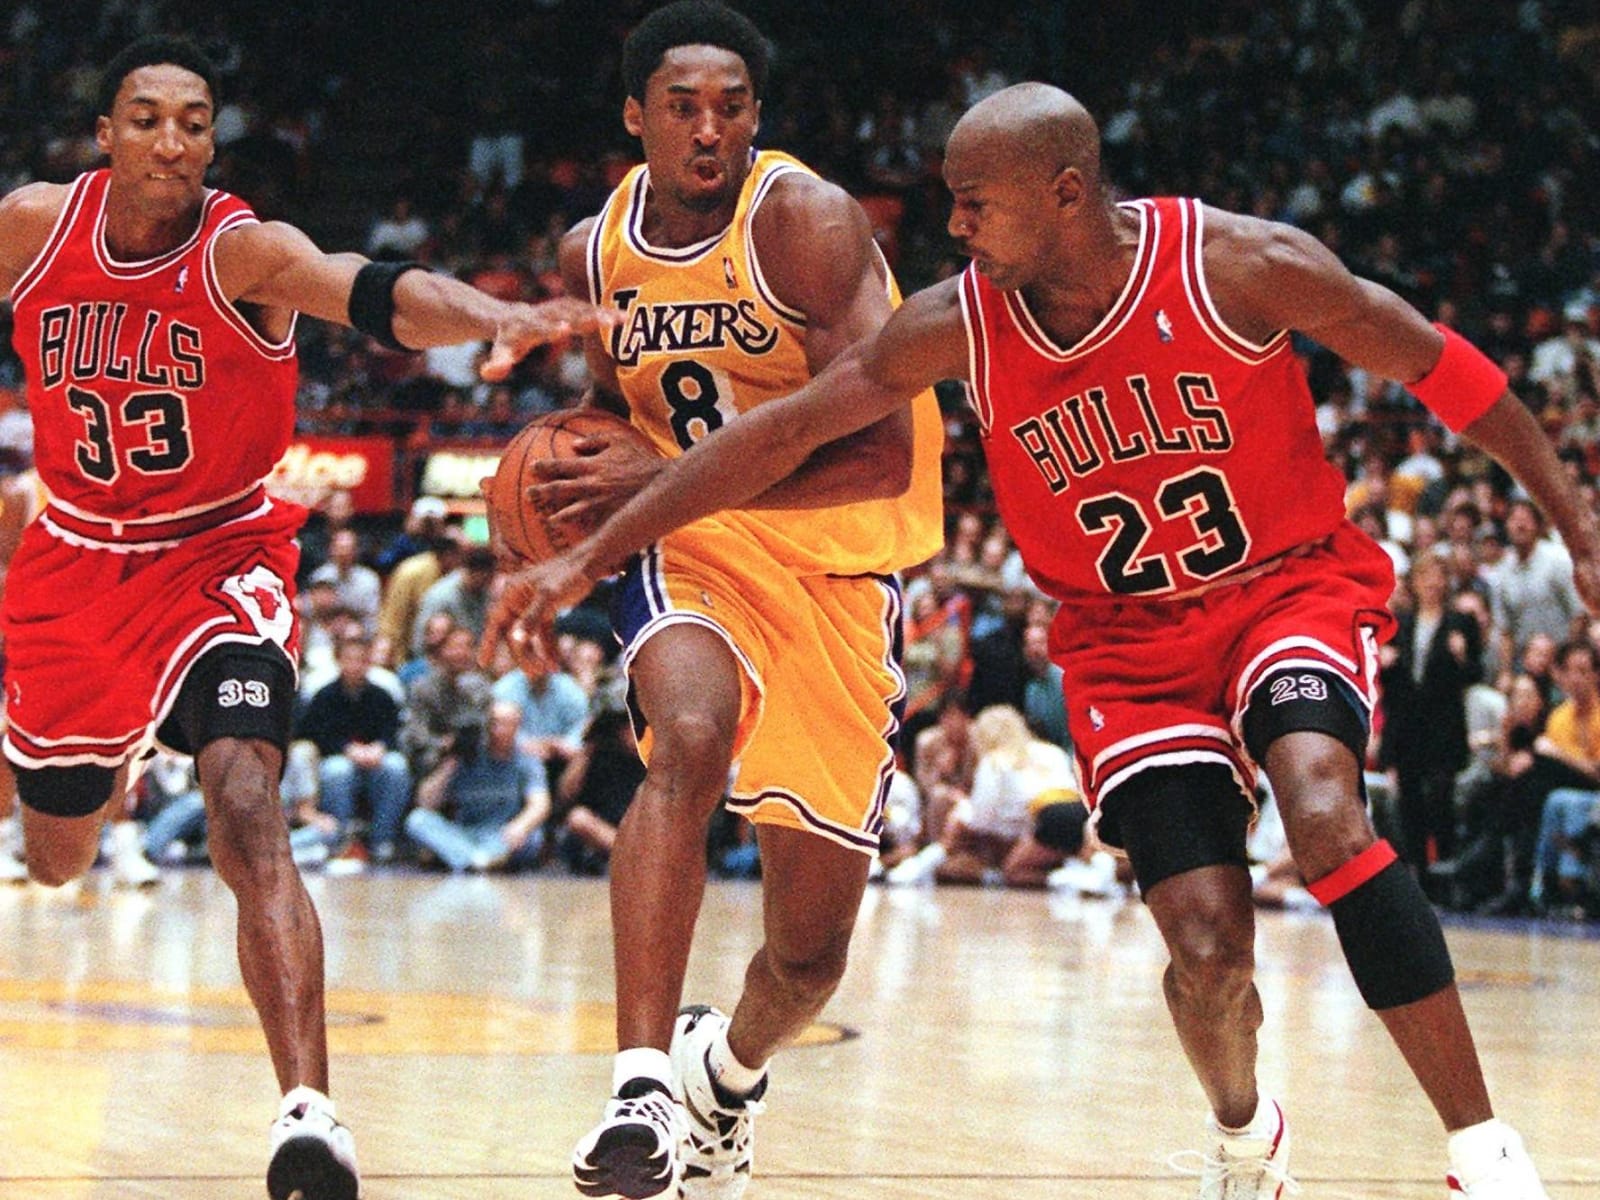 The Last Dance: Looking back at 1998 Bulls vs. Pacers Eastern